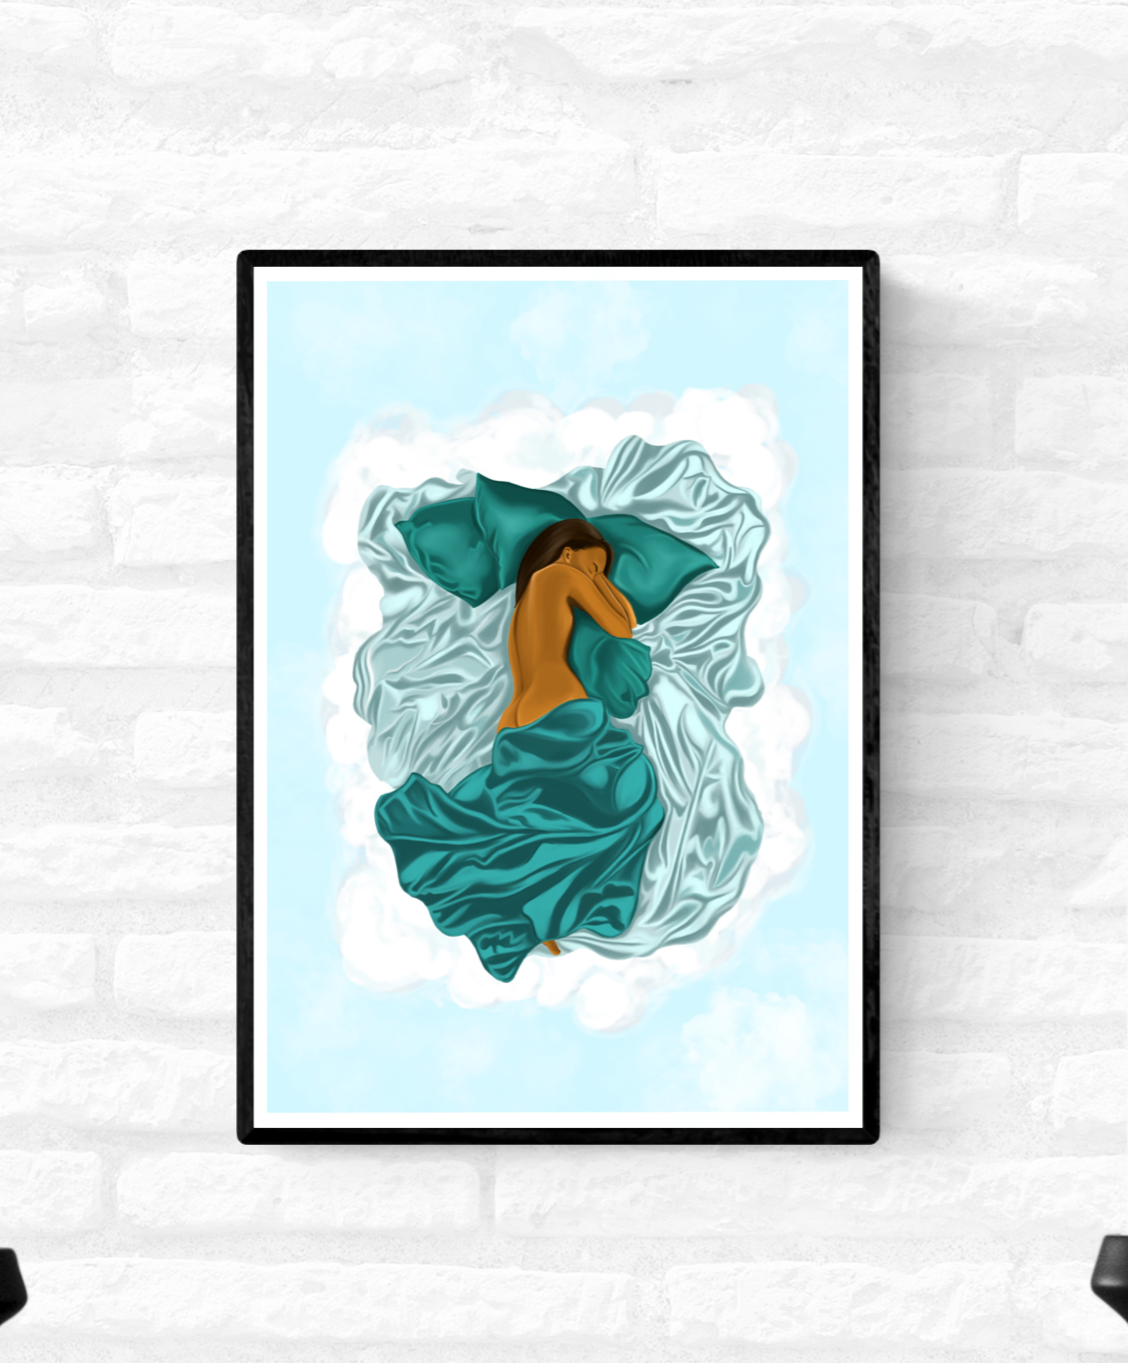 Framed artwork of a black woman sleeping in her cloud bed and she is half covered by green satin sheets